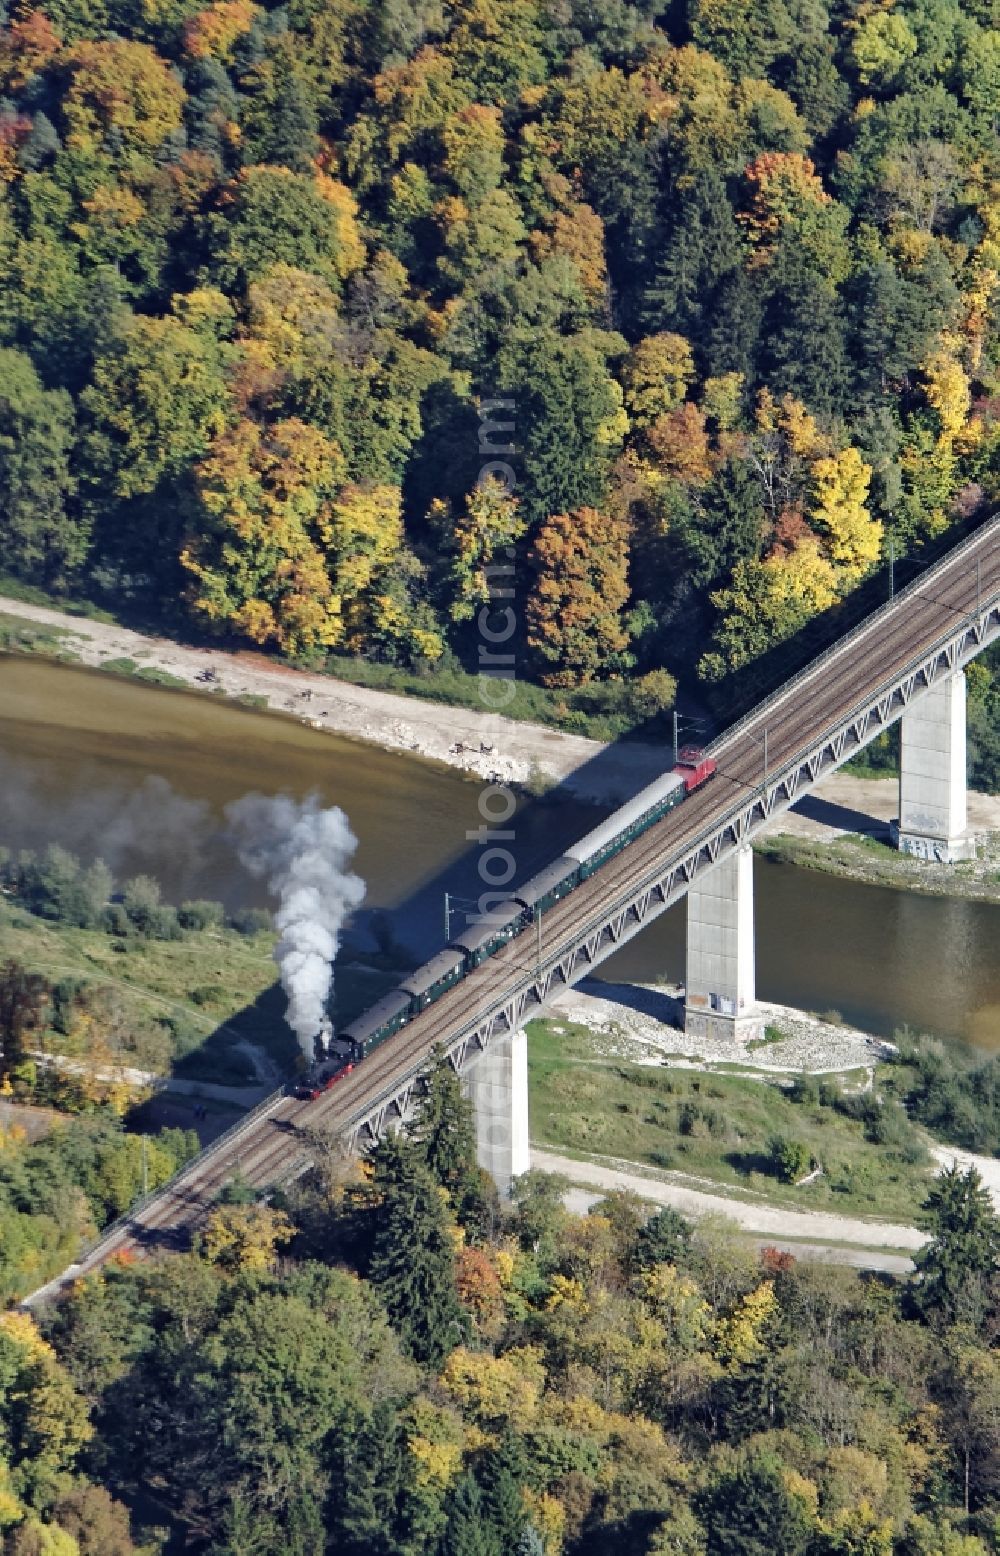 Pullach im Isartal from the bird's eye view: Ancient electric train and steam train on the Grosshesseloher Bruecke in Pullach im Isartal in the state Bavaria